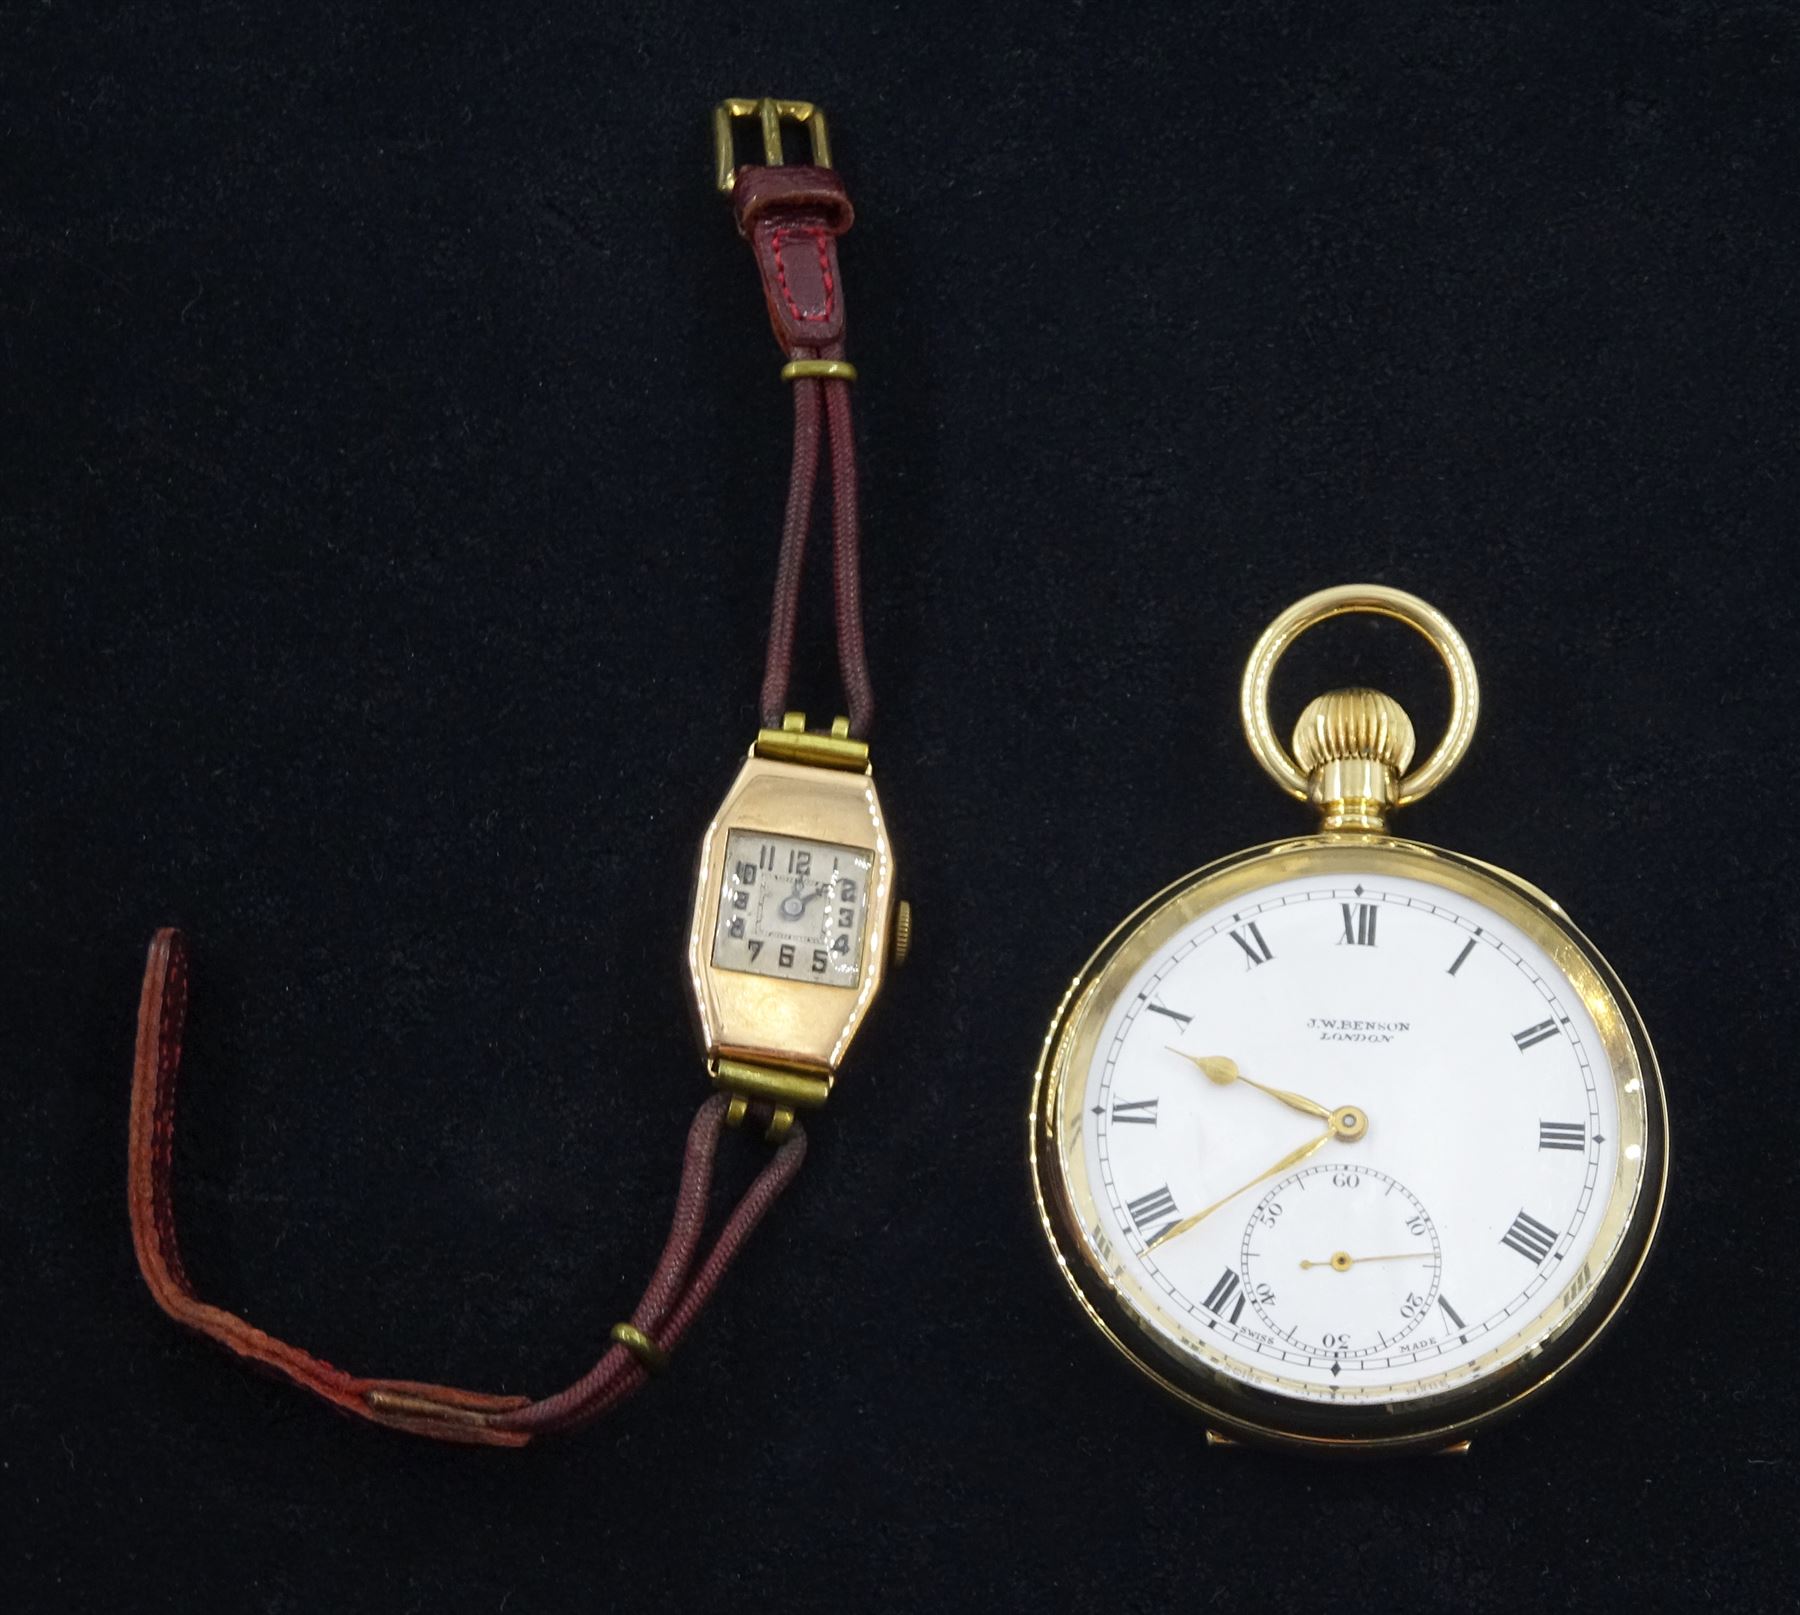 Early 20th century open face gold-plated keyless lever pocket watch by J.W.Benson